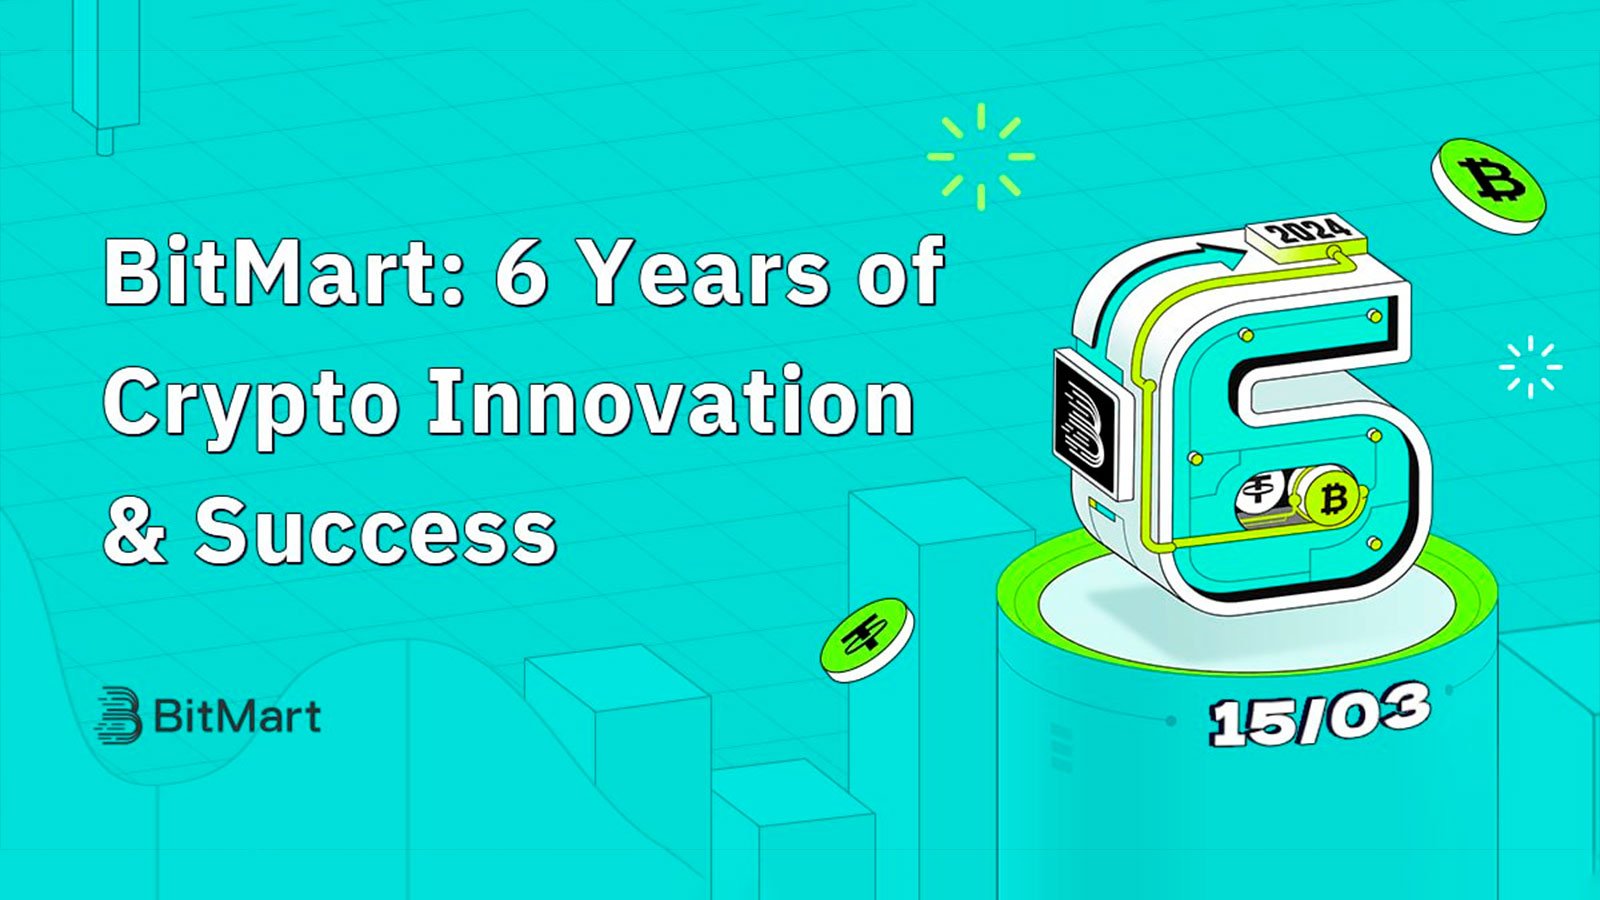 BitMart Celebrates Six Years of Innovation and Success in the Crypto Industry